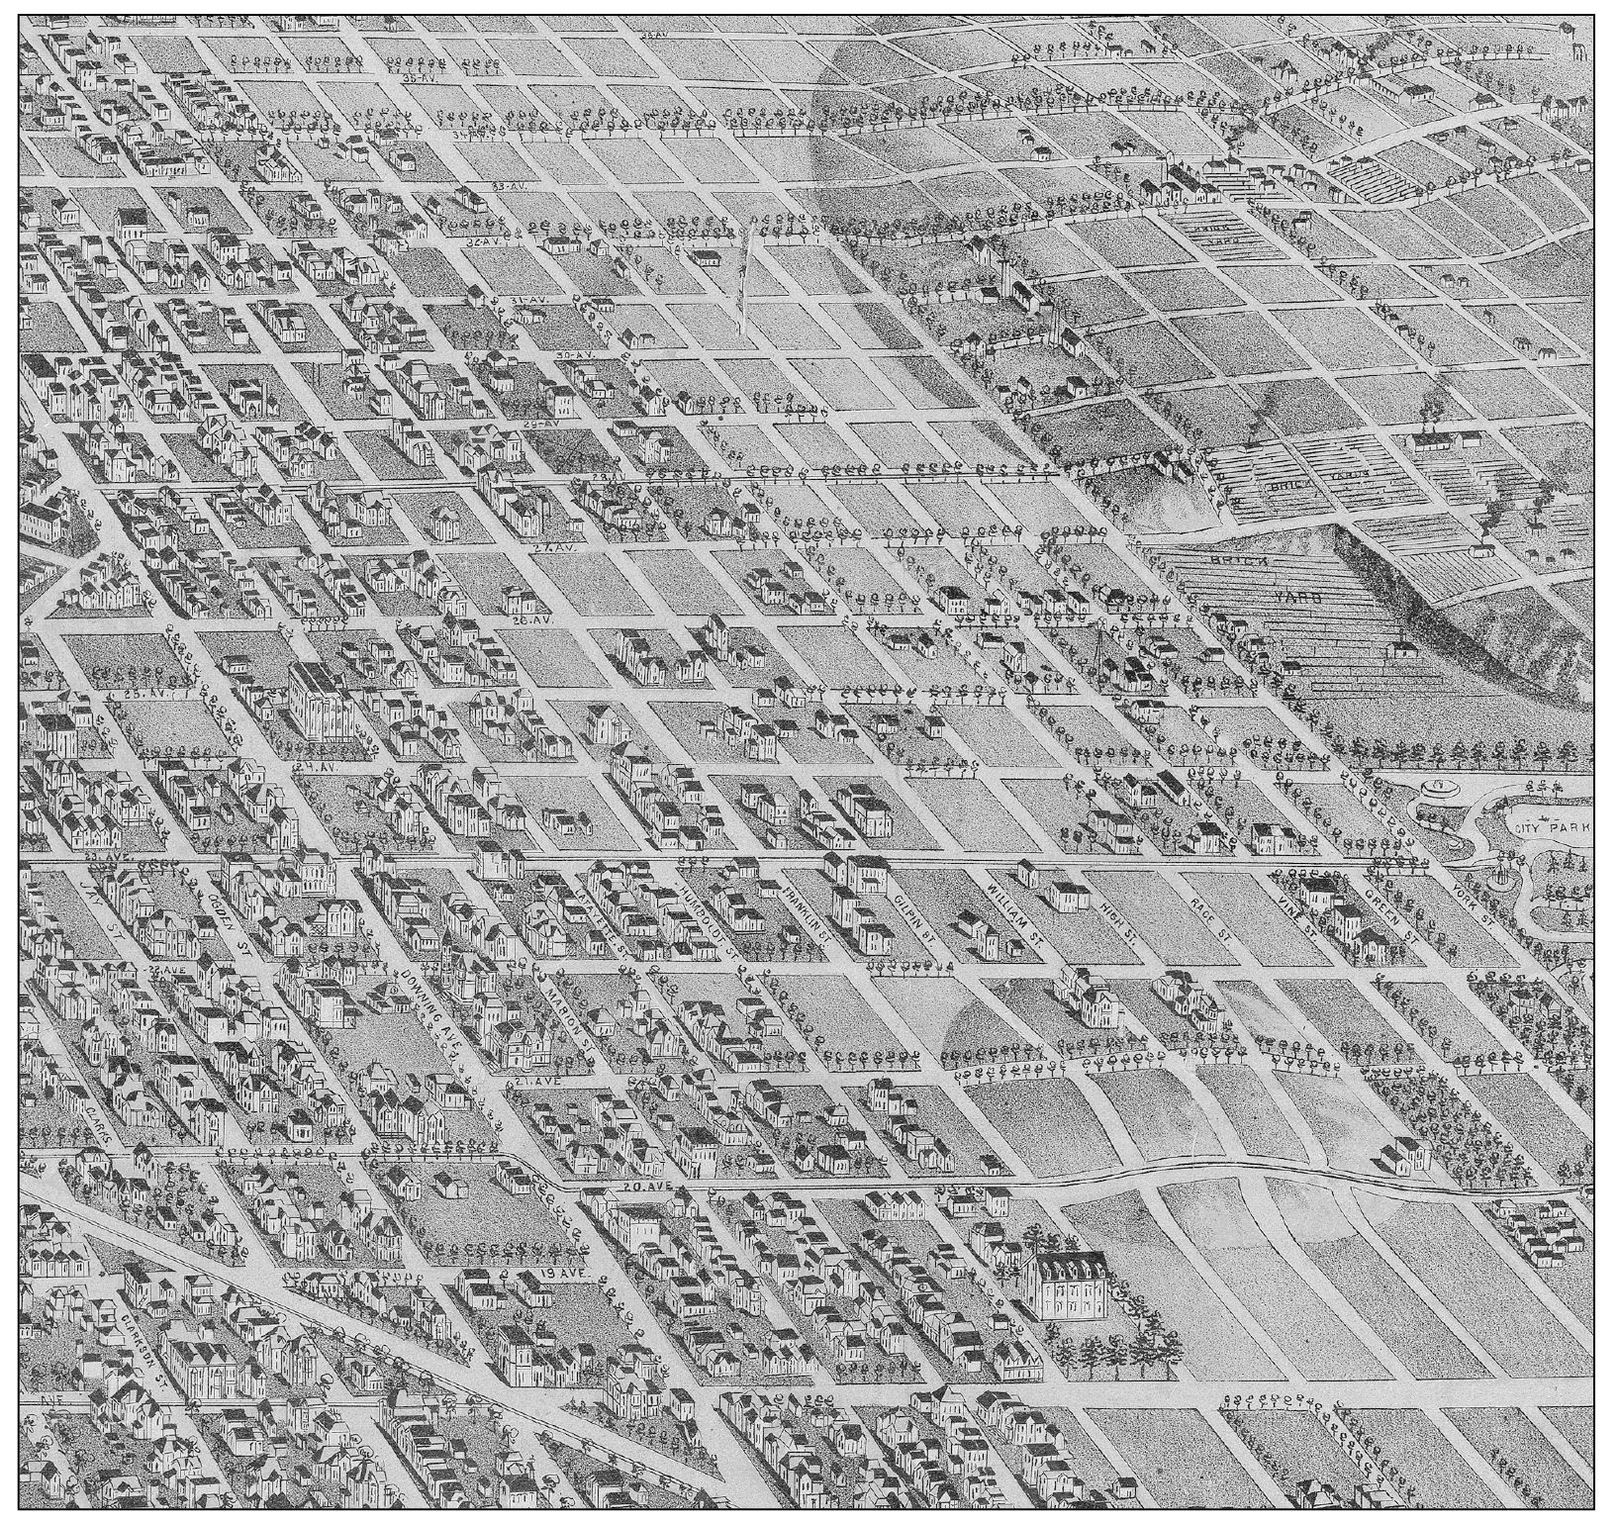 THE WHITTIER AREA PERSPECTIVE MAP 1889 Whittier was a new residential area in - photo 3